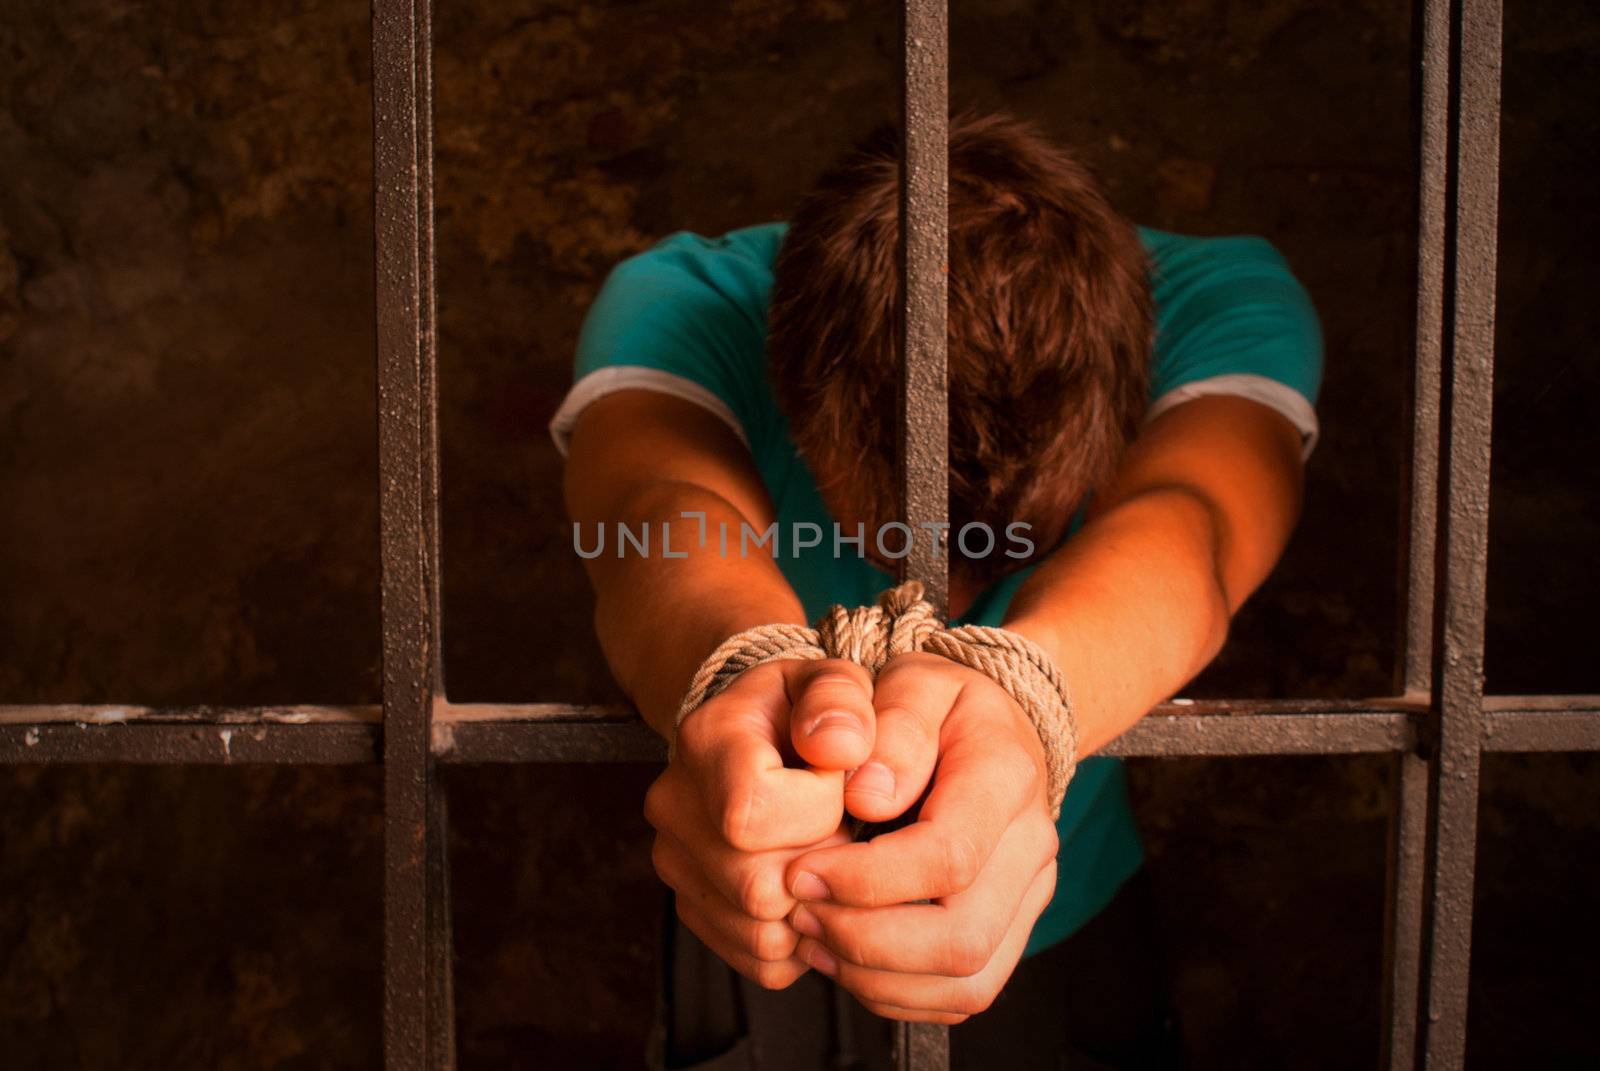 Man with hands tied with rope behind the bars